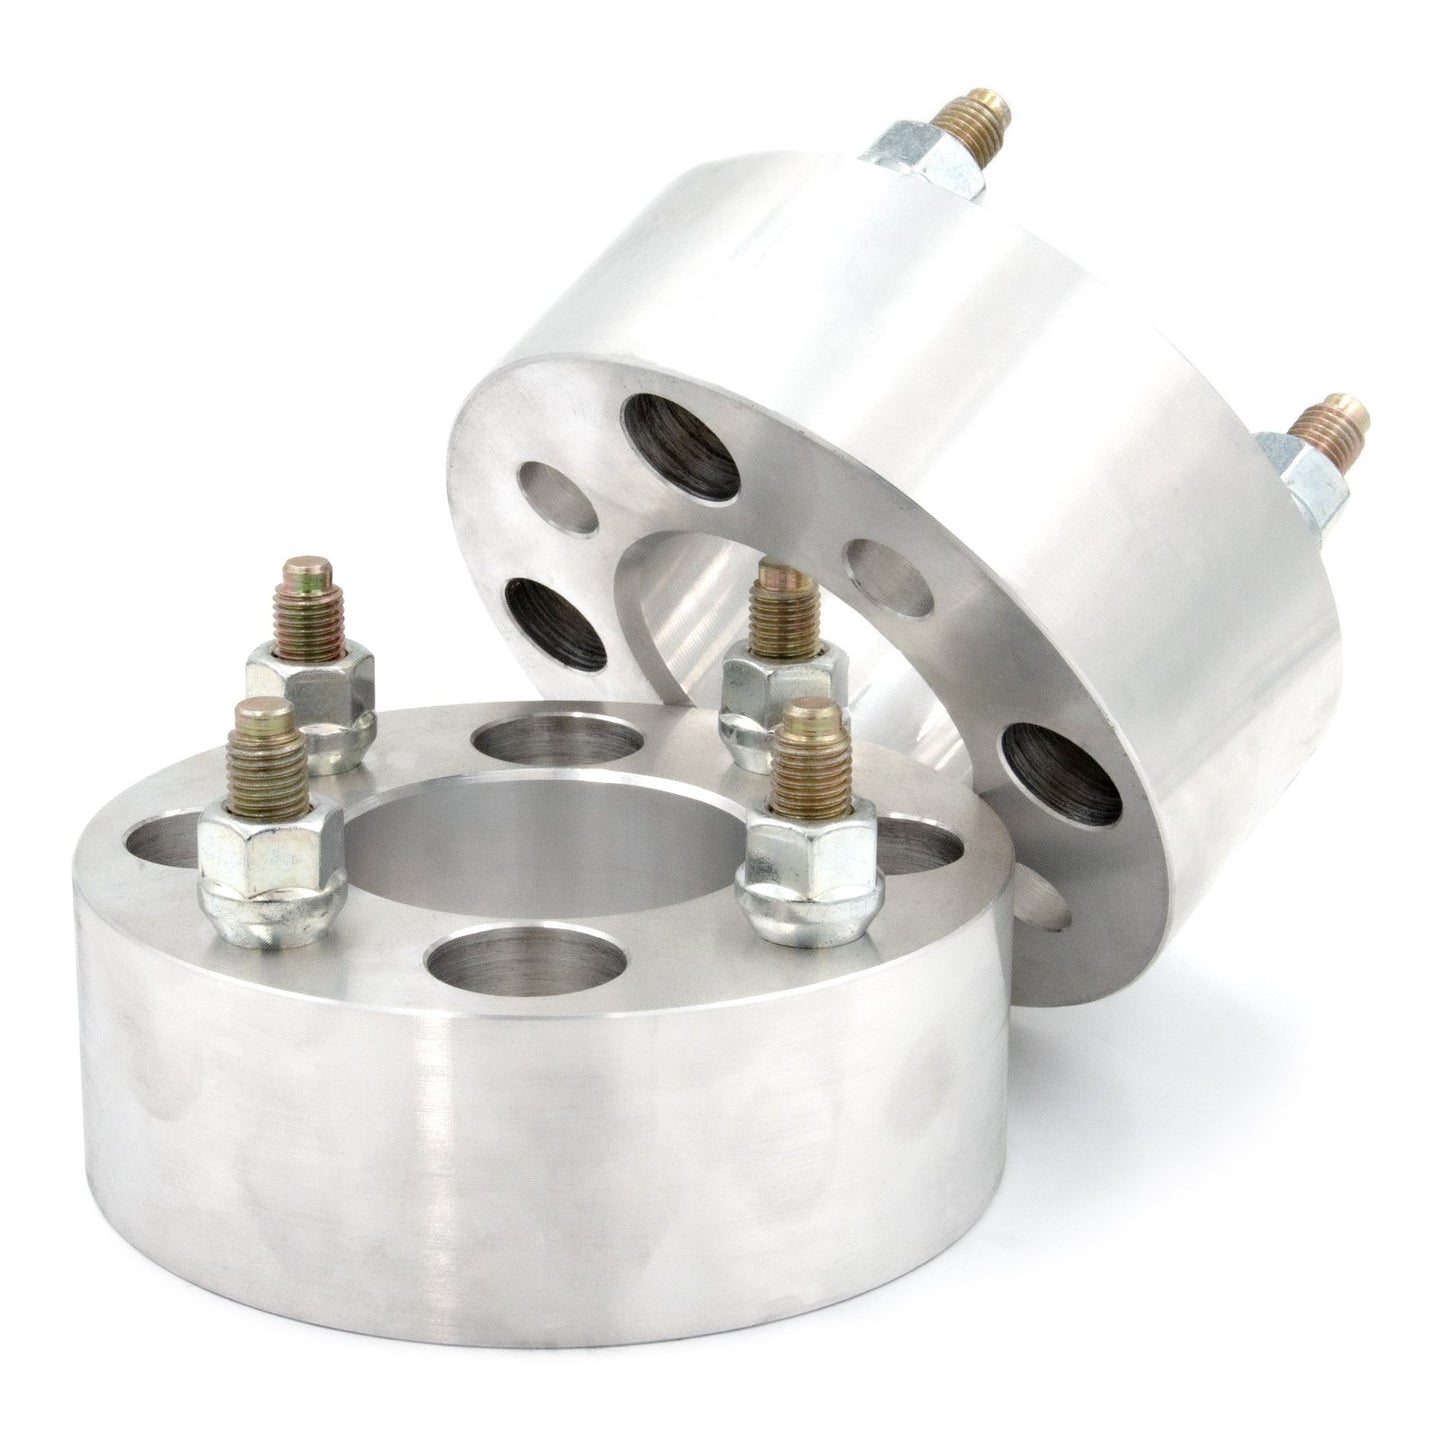 4x100 to 4x120 Wheel Spacer/Adapter - Thickness: 3/4"- 4"